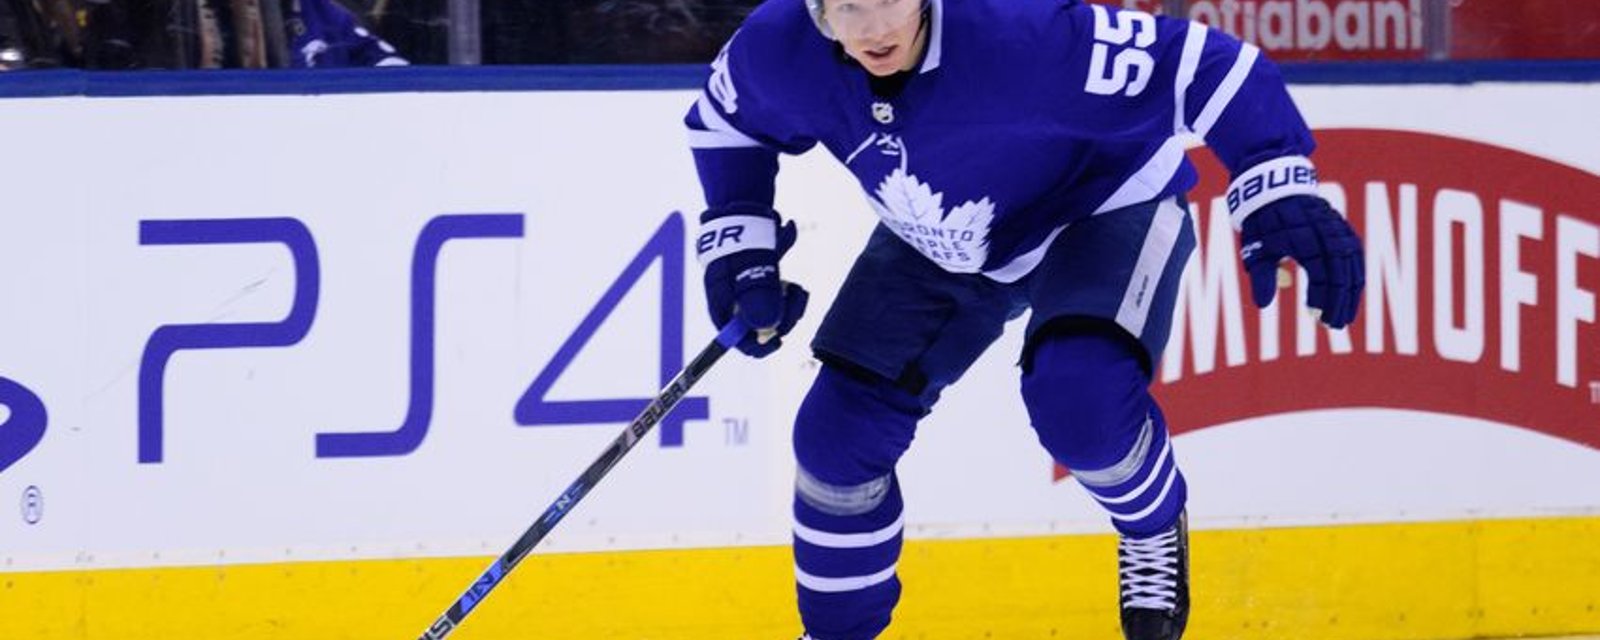 Breaking: Leafs sign Borgman to extension 